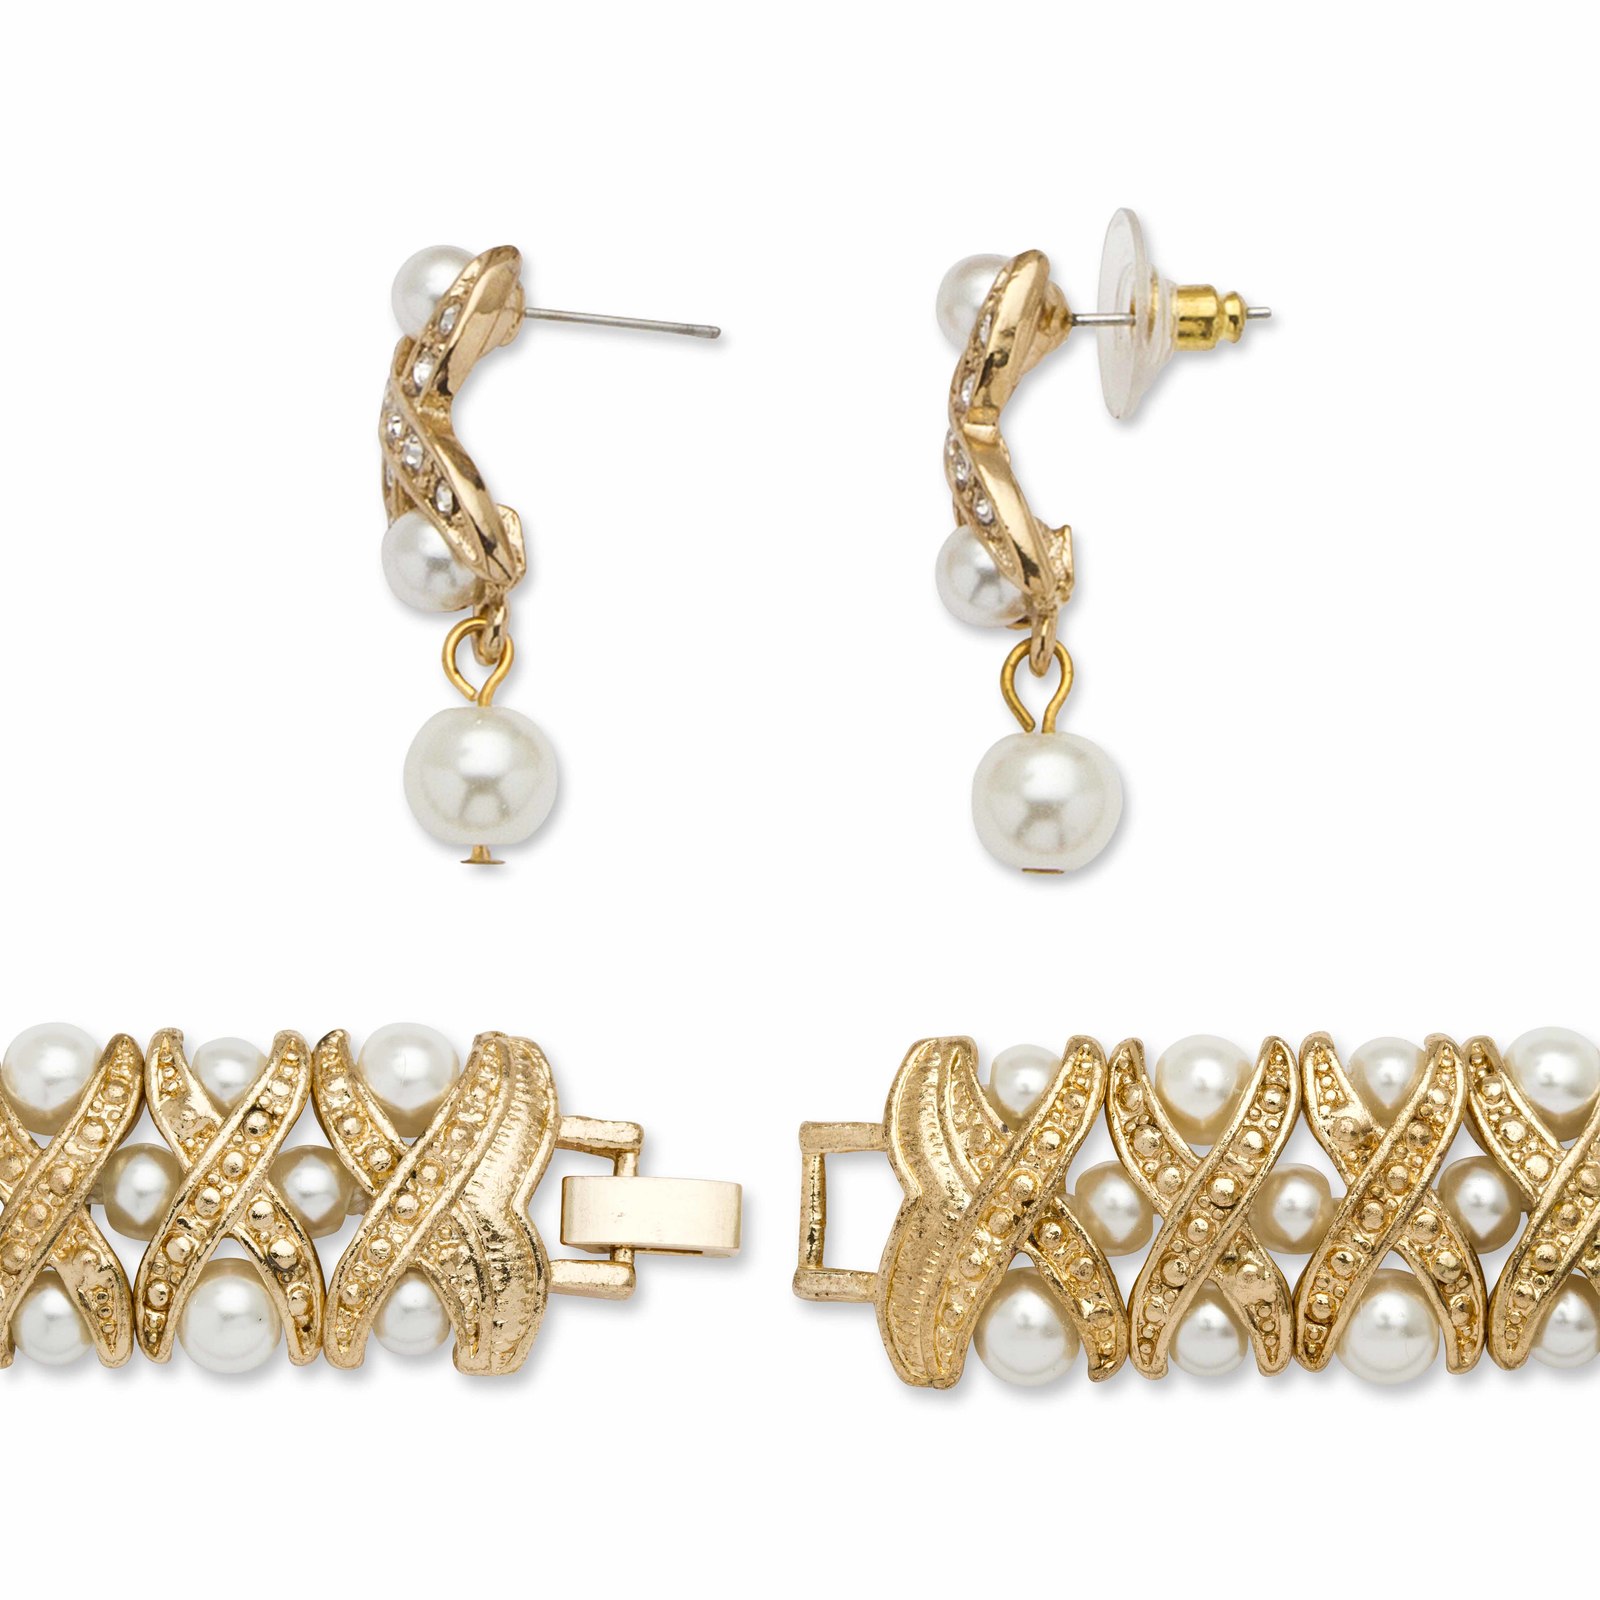 PalmBeach Jewelry Pearl and Crystal 3-Piece Set in Yellow Goldtone - $49.32